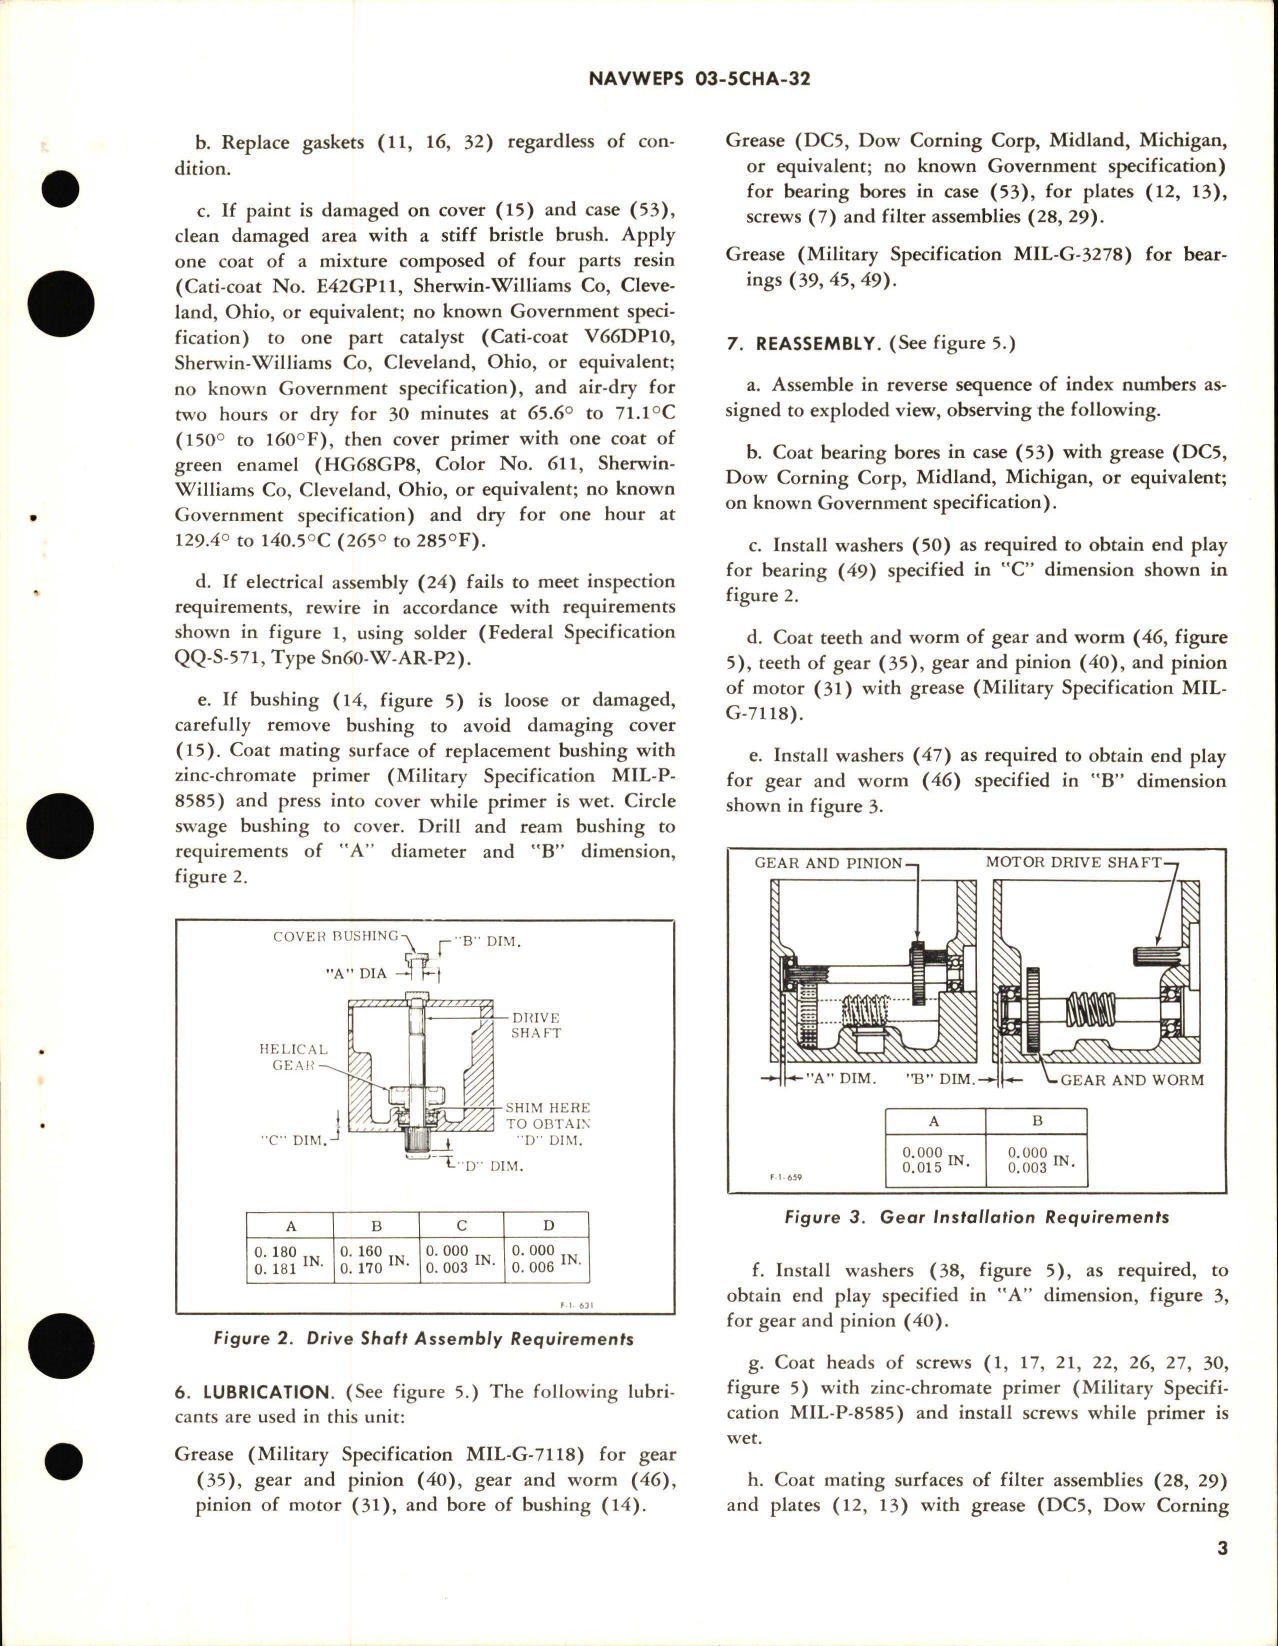 Sample page 5 from AirCorps Library document: Overhaul Instructions with Parts Breakdown for Electromechanical Rotary Actuator - Part 38032-1